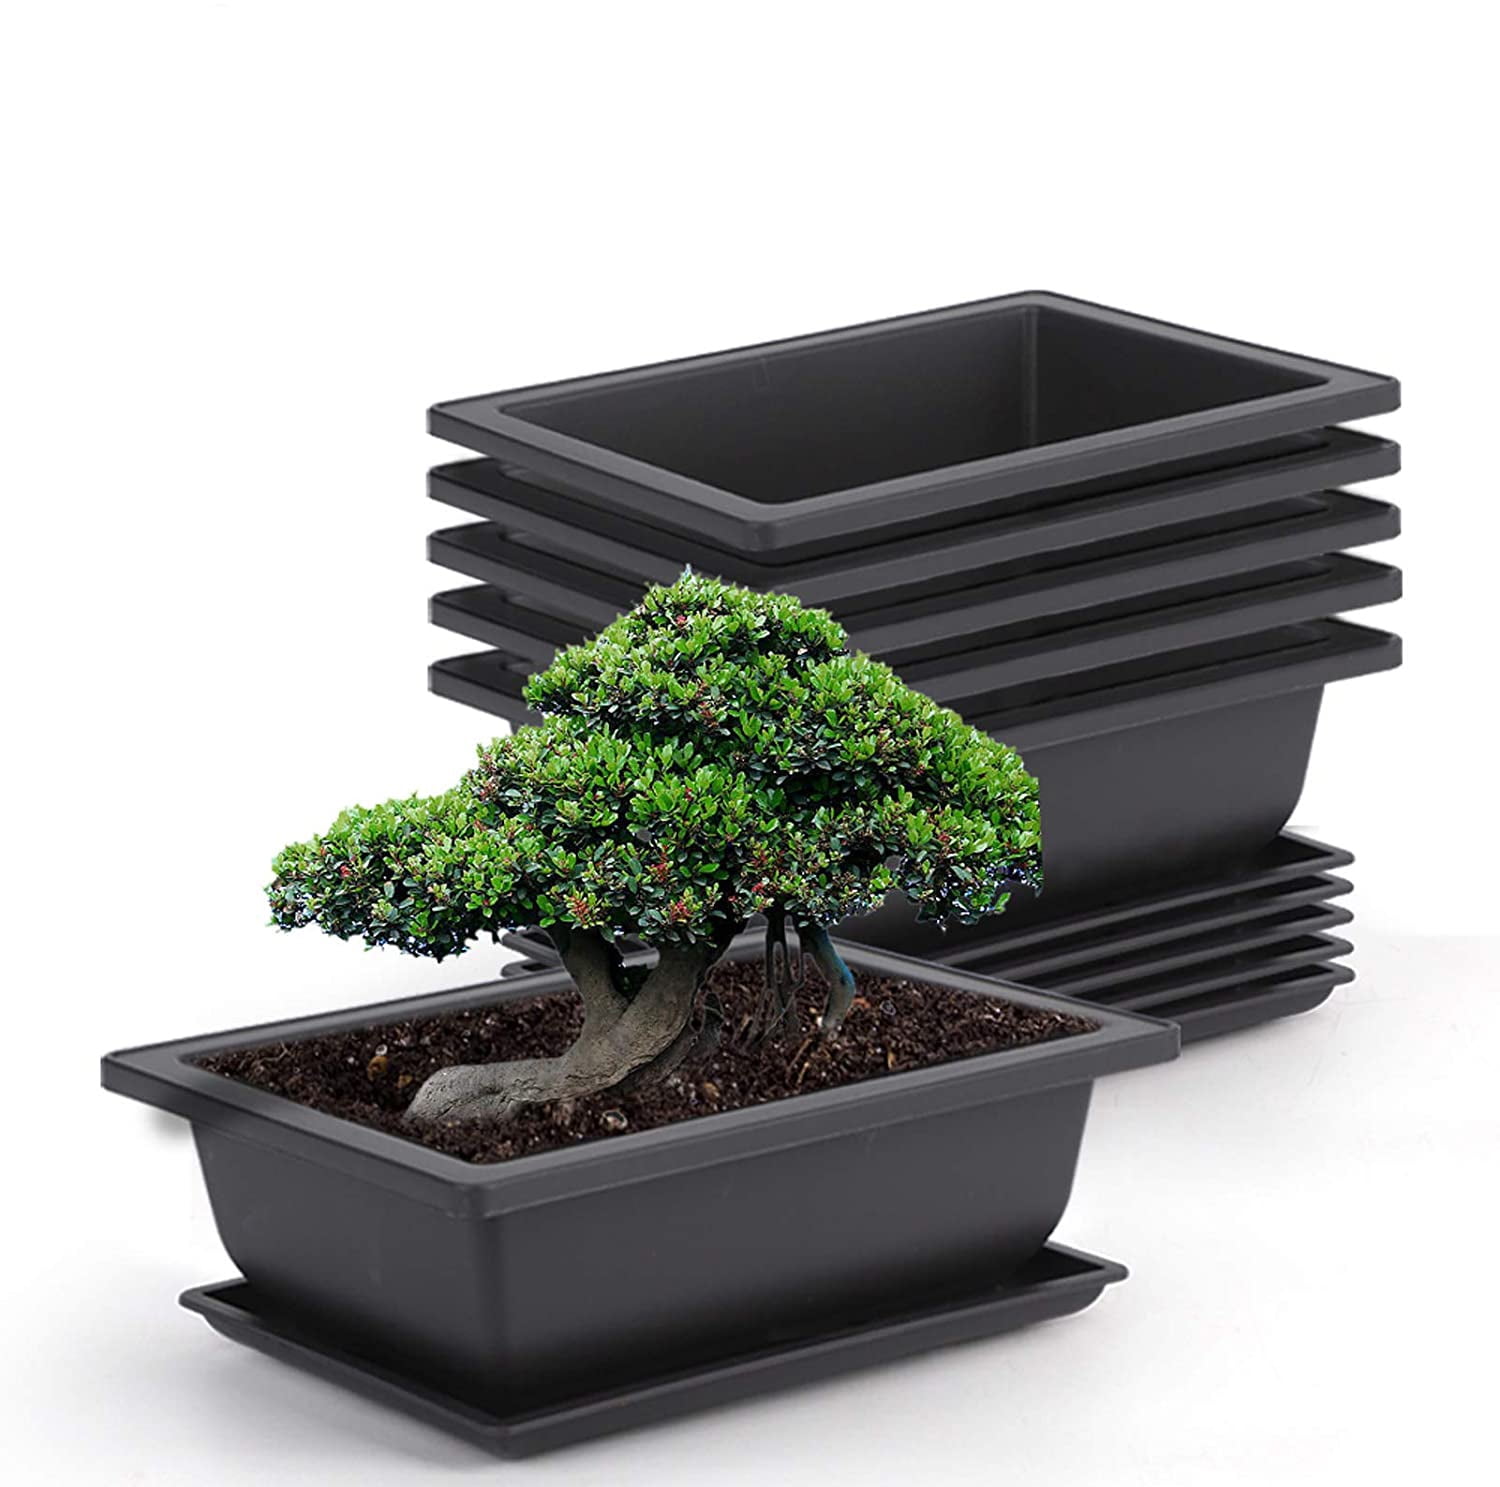 18 Packs 18 Inches Bonsai Training Pots, Plastic Bonsai Plants Growing Pot  for Garden, Yard, Office, Living Room, Balcony and MoreLarge